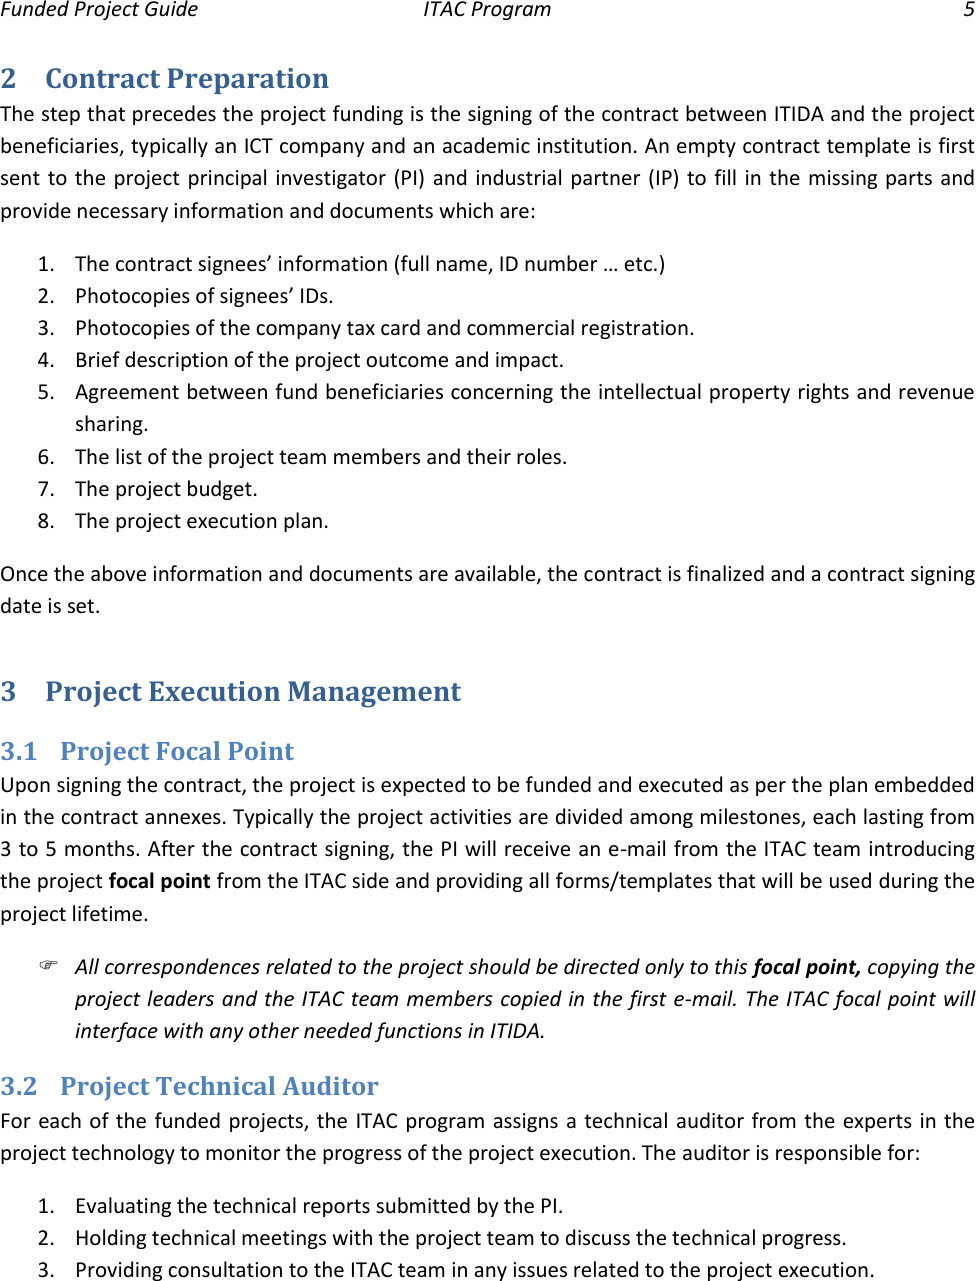 Page 5 of 8 - Funded Projects Guide 2016